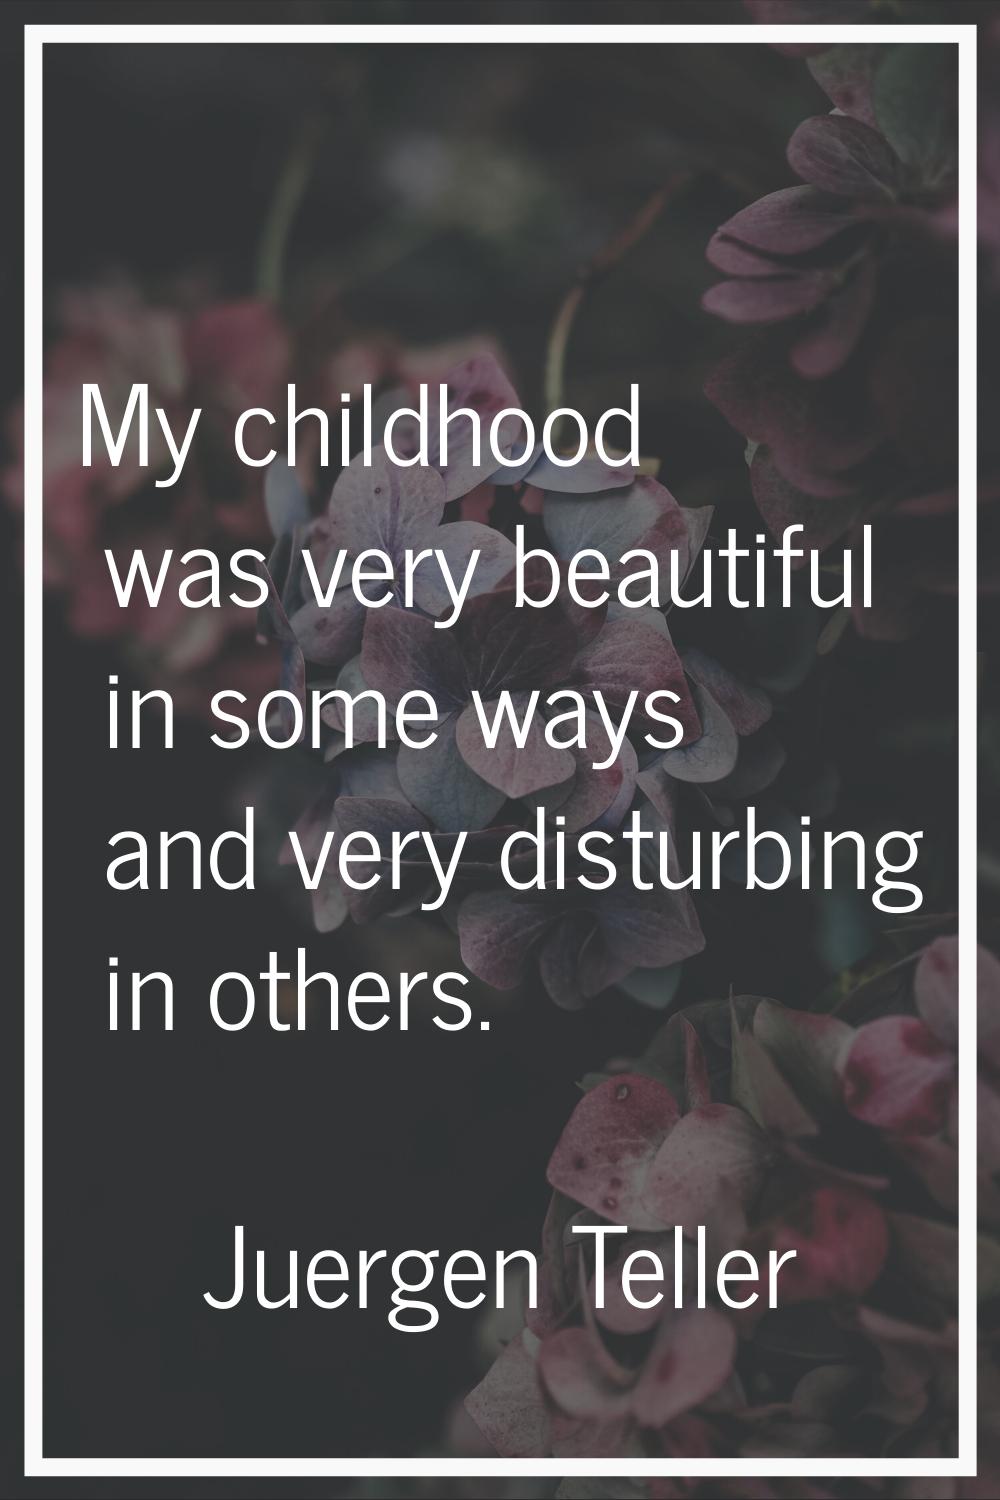 My childhood was very beautiful in some ways and very disturbing in others.